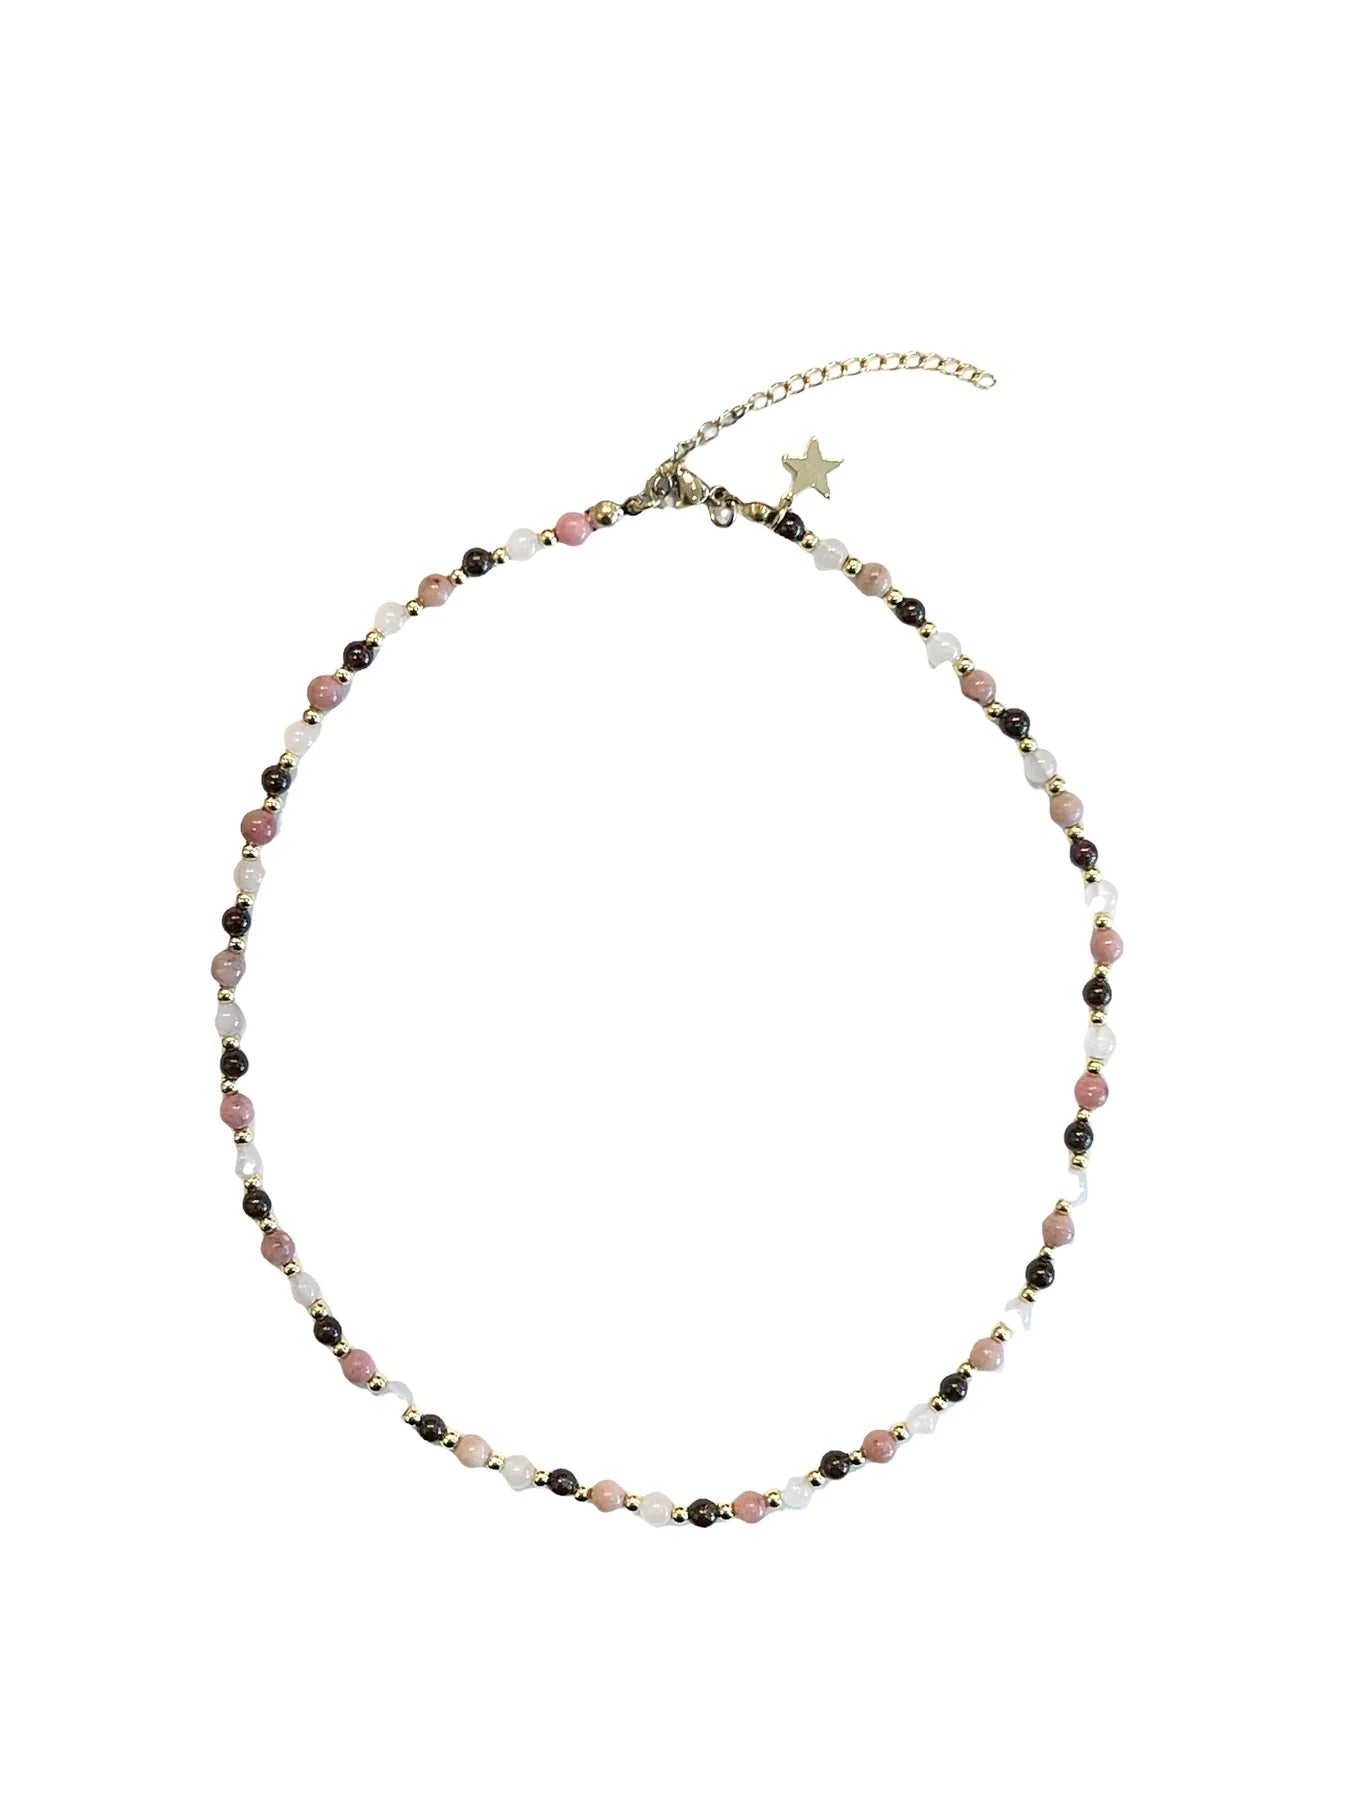 Stone Bead Necklace 4mm W/Gold Beads Rose Mix